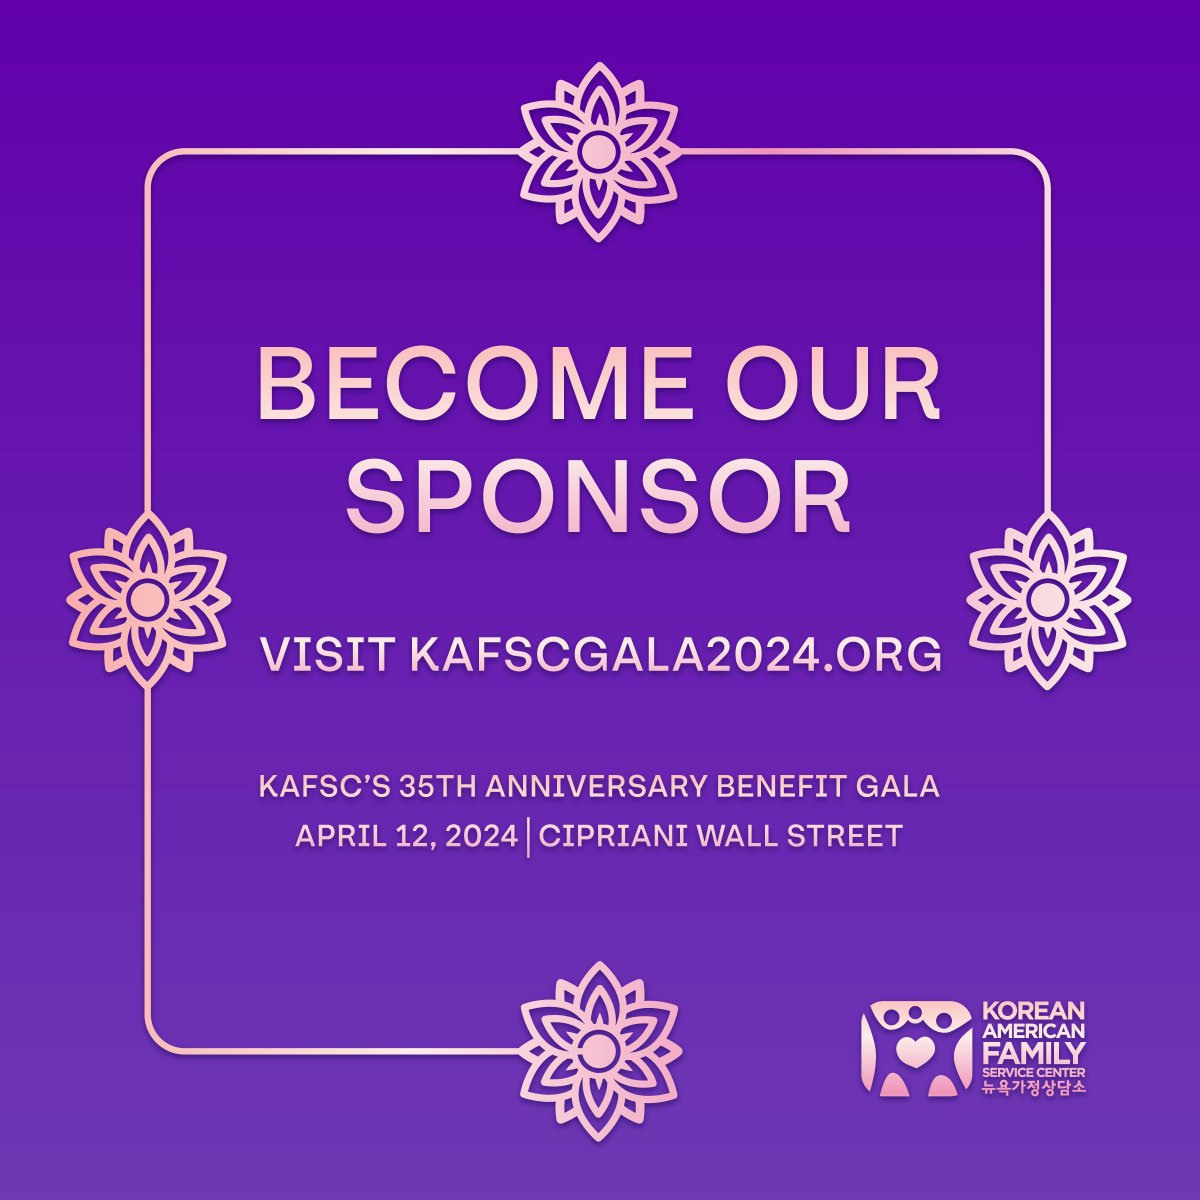 We're gearing up for a monumental moment – KAFSC's 35th Anniversary Benefit Gala is less than three months away! Join us in celebrating the remarkable achievements of immigrant survivors and families impacted by gender-based violence. Become our Sponsor today!